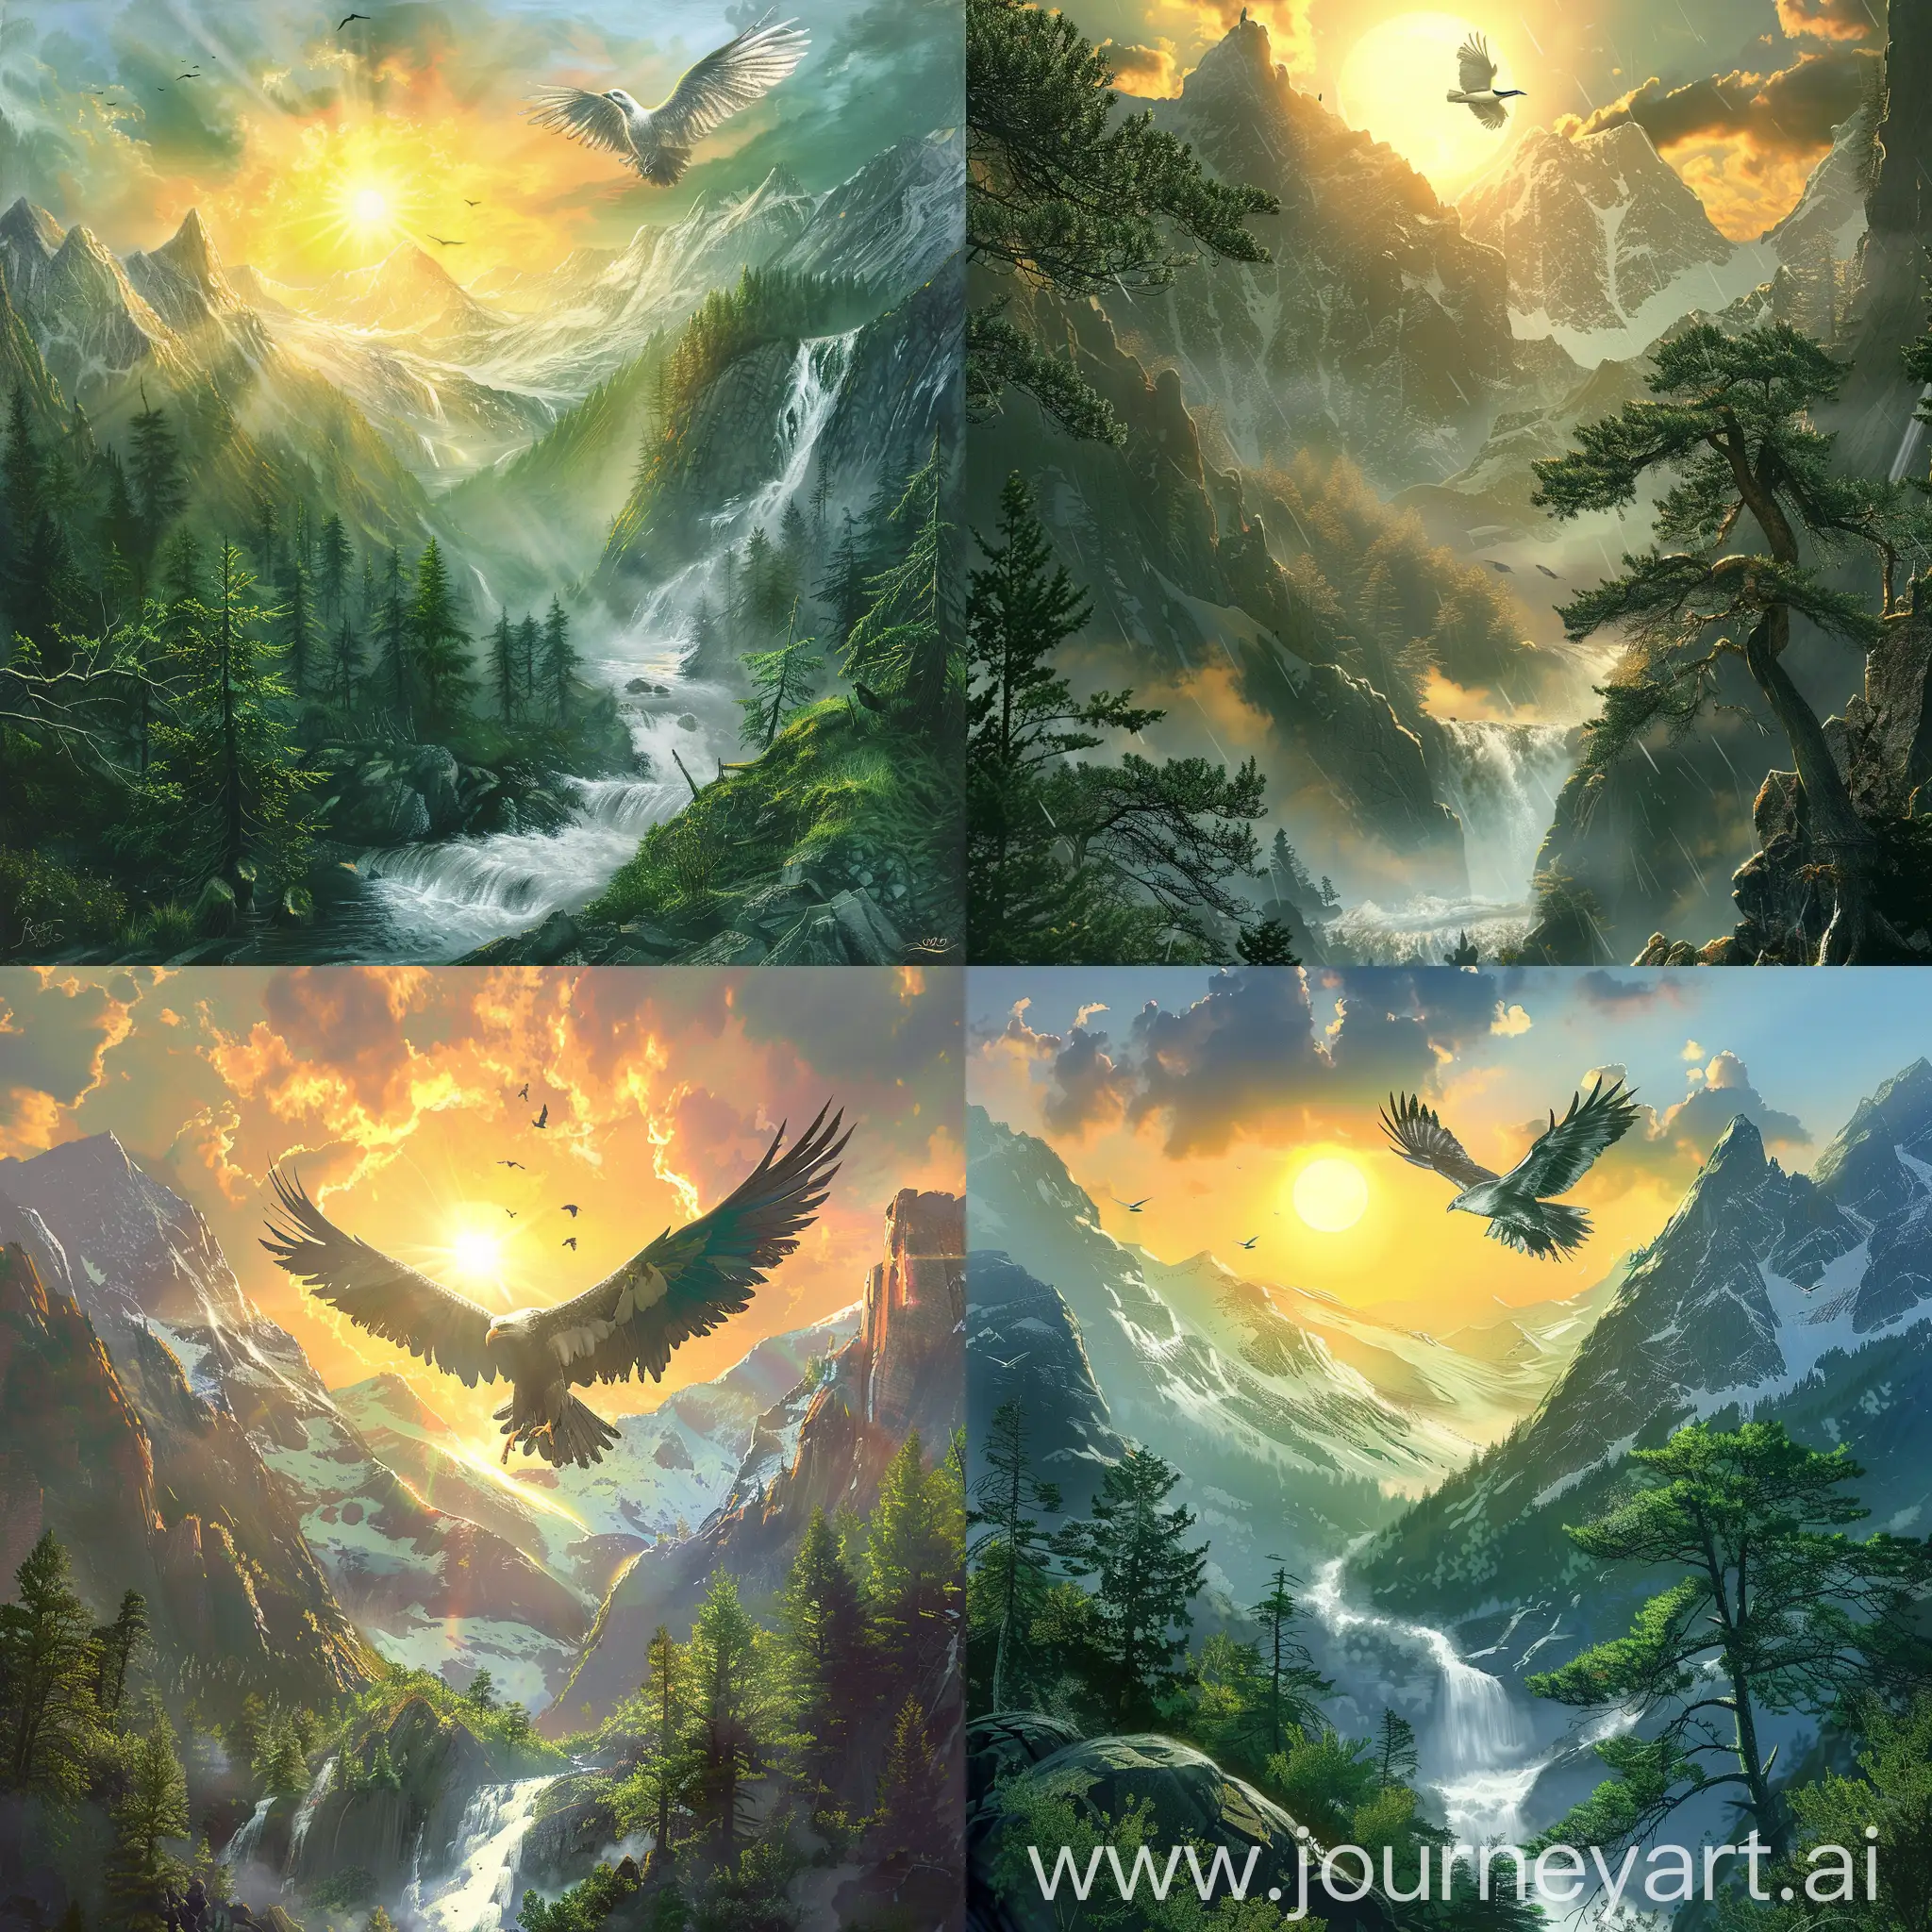 beautiful nature, green trees, mountains, a big sun is shining from behind the mountains, water is flowing like a river from the mountains. one big silver bird flew in the sky, the bird is very proud and has big wings